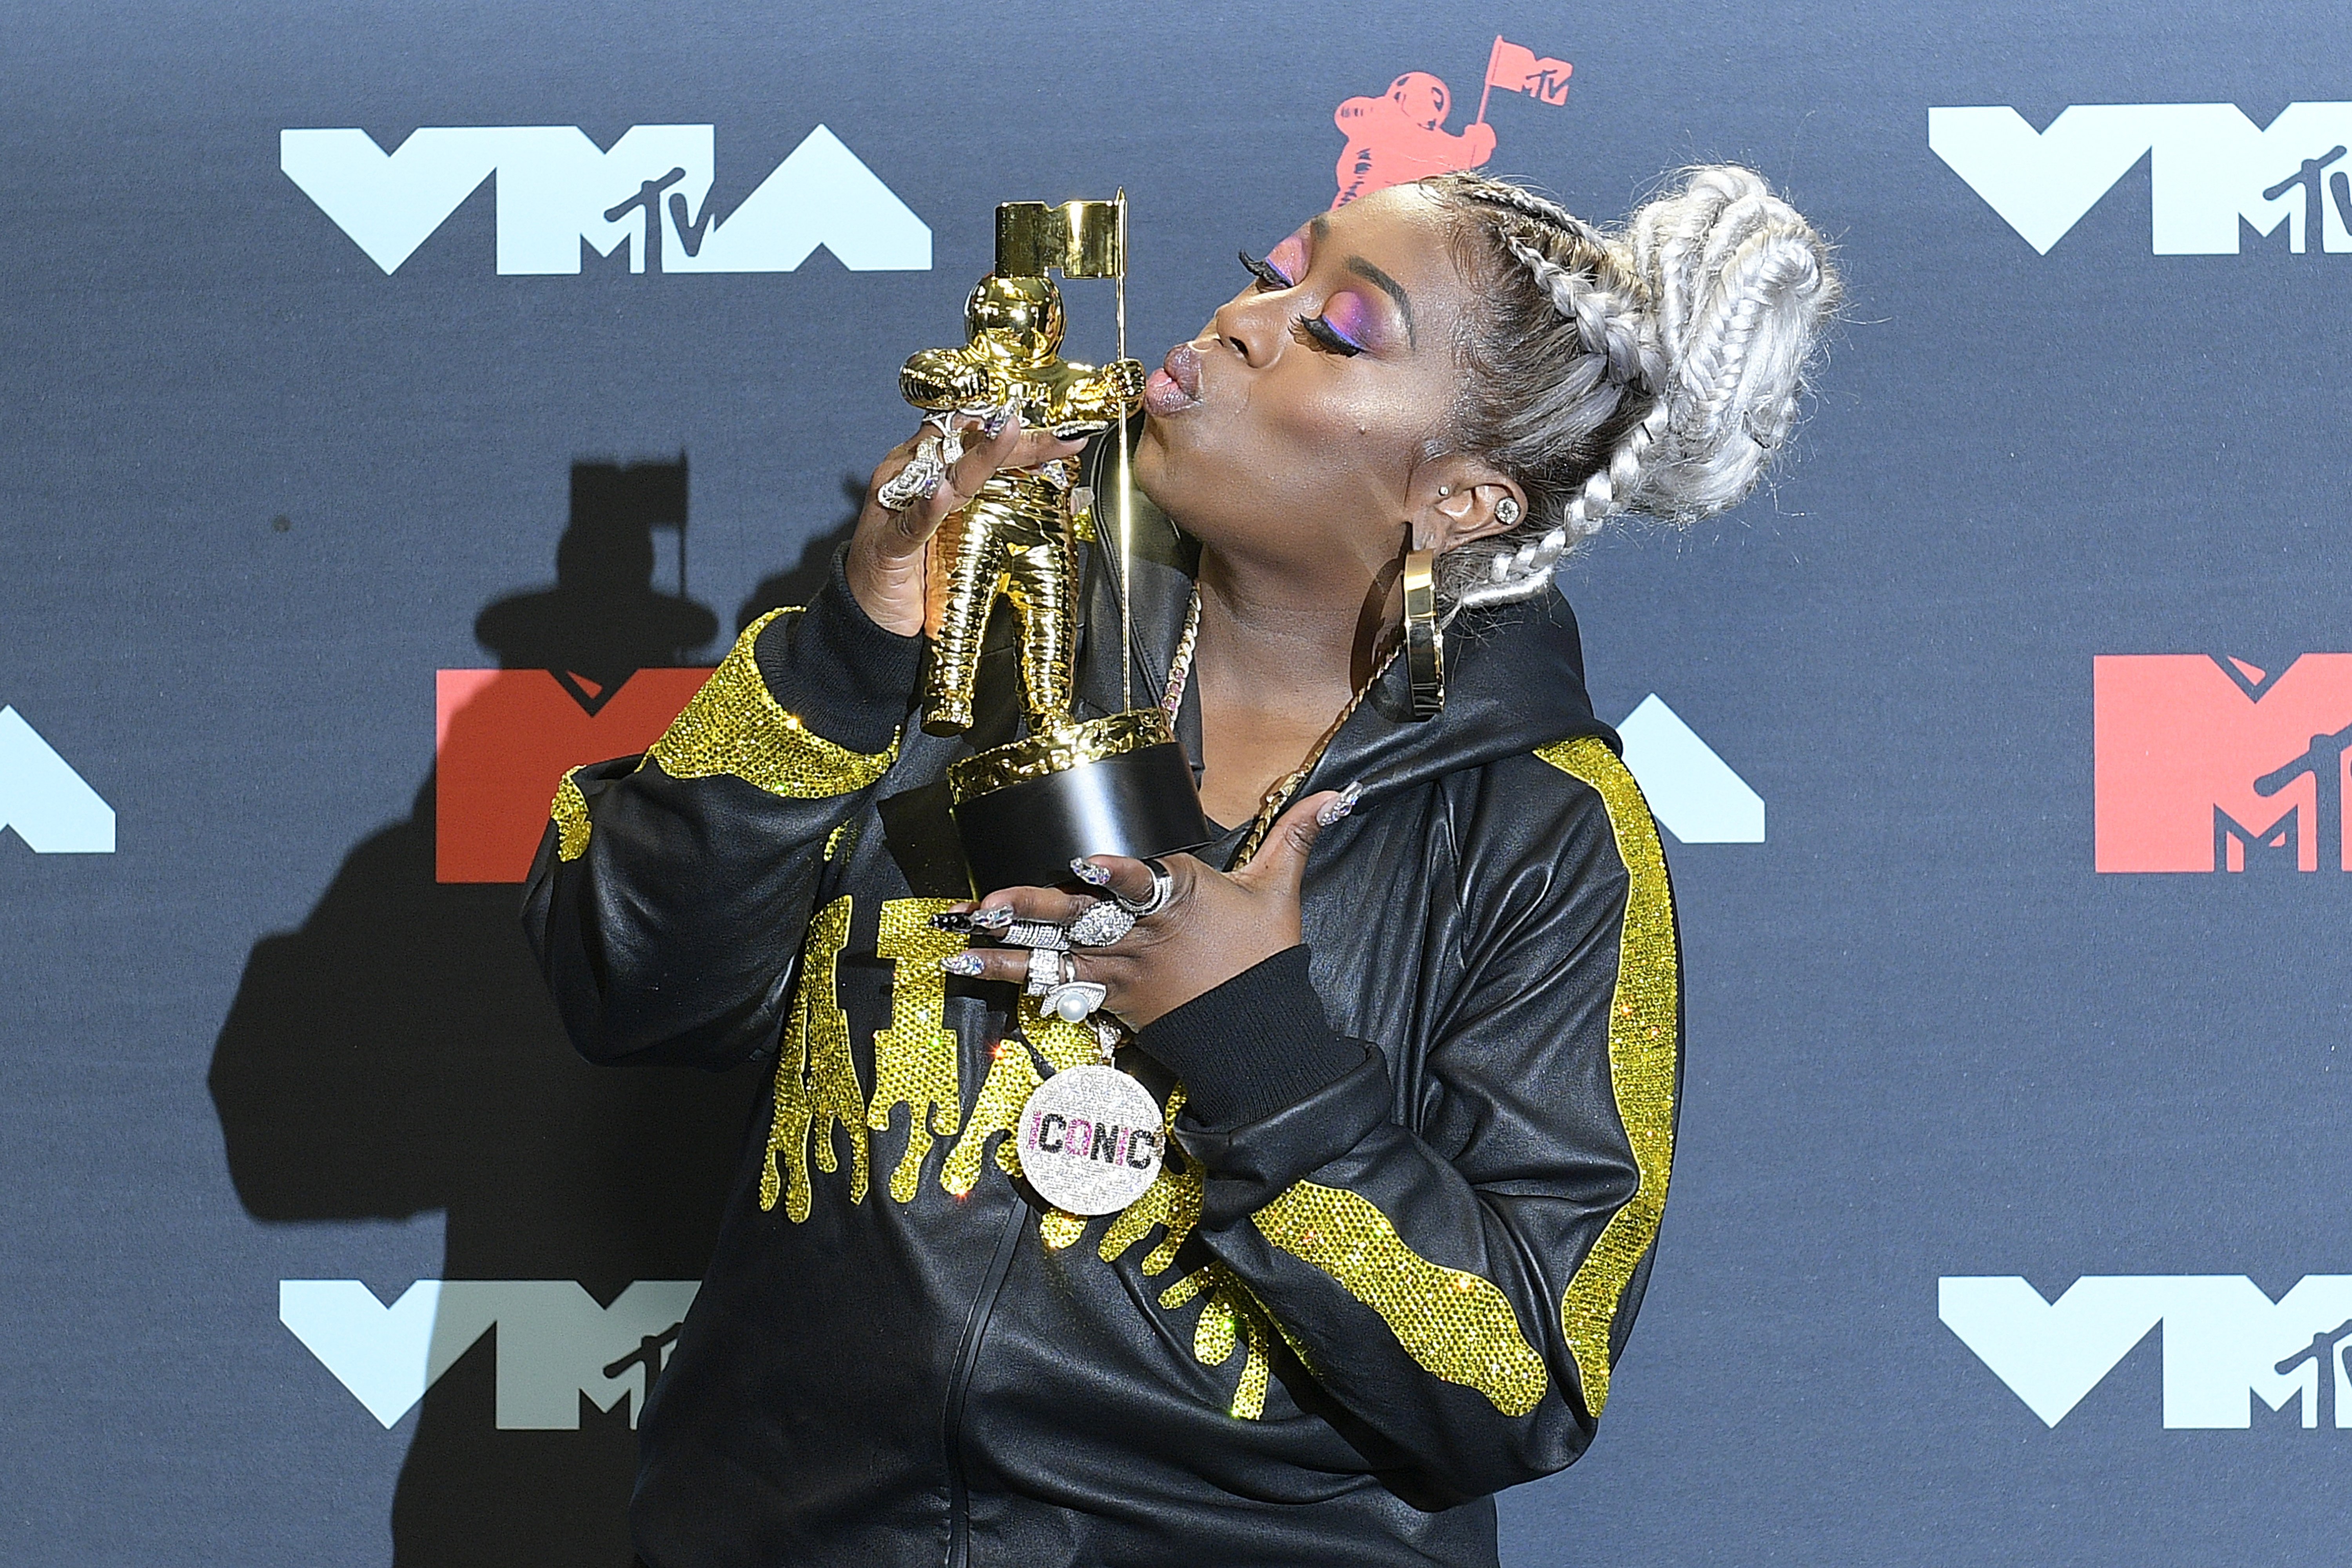 Missy Elliott poses at the 2019 MTV Video Music Awards in Newark, New Jersey on Aug, 26, 2019 | Photo: Getty Images